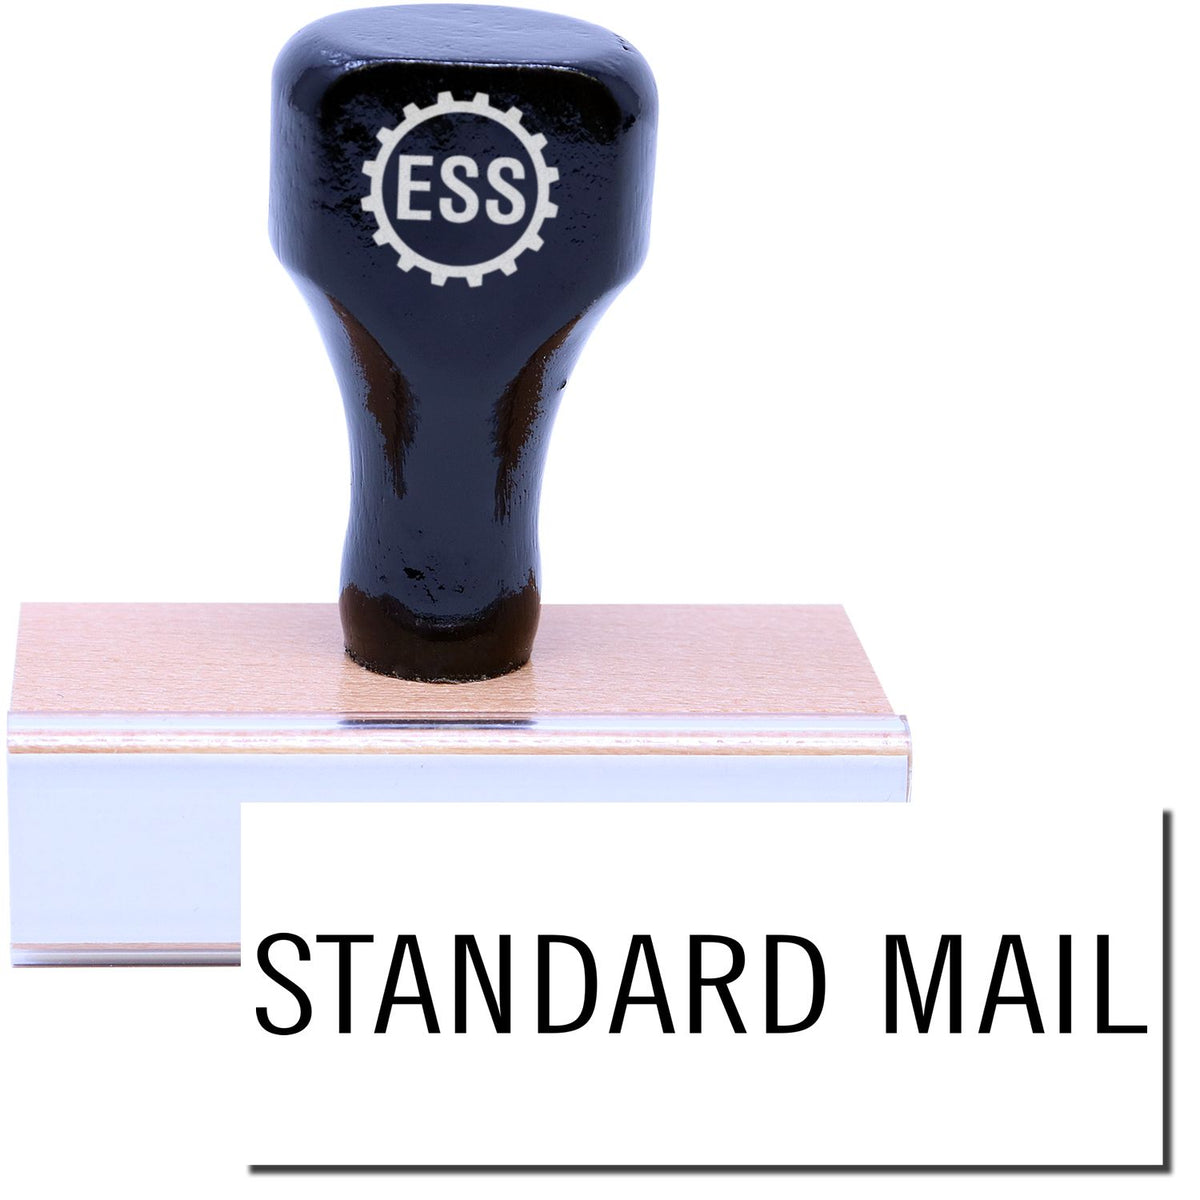 A stock office rubber stamp with a stamped image showing how the text &quot;STANDARD MAIL&quot; in a large font is displayed after stamping.